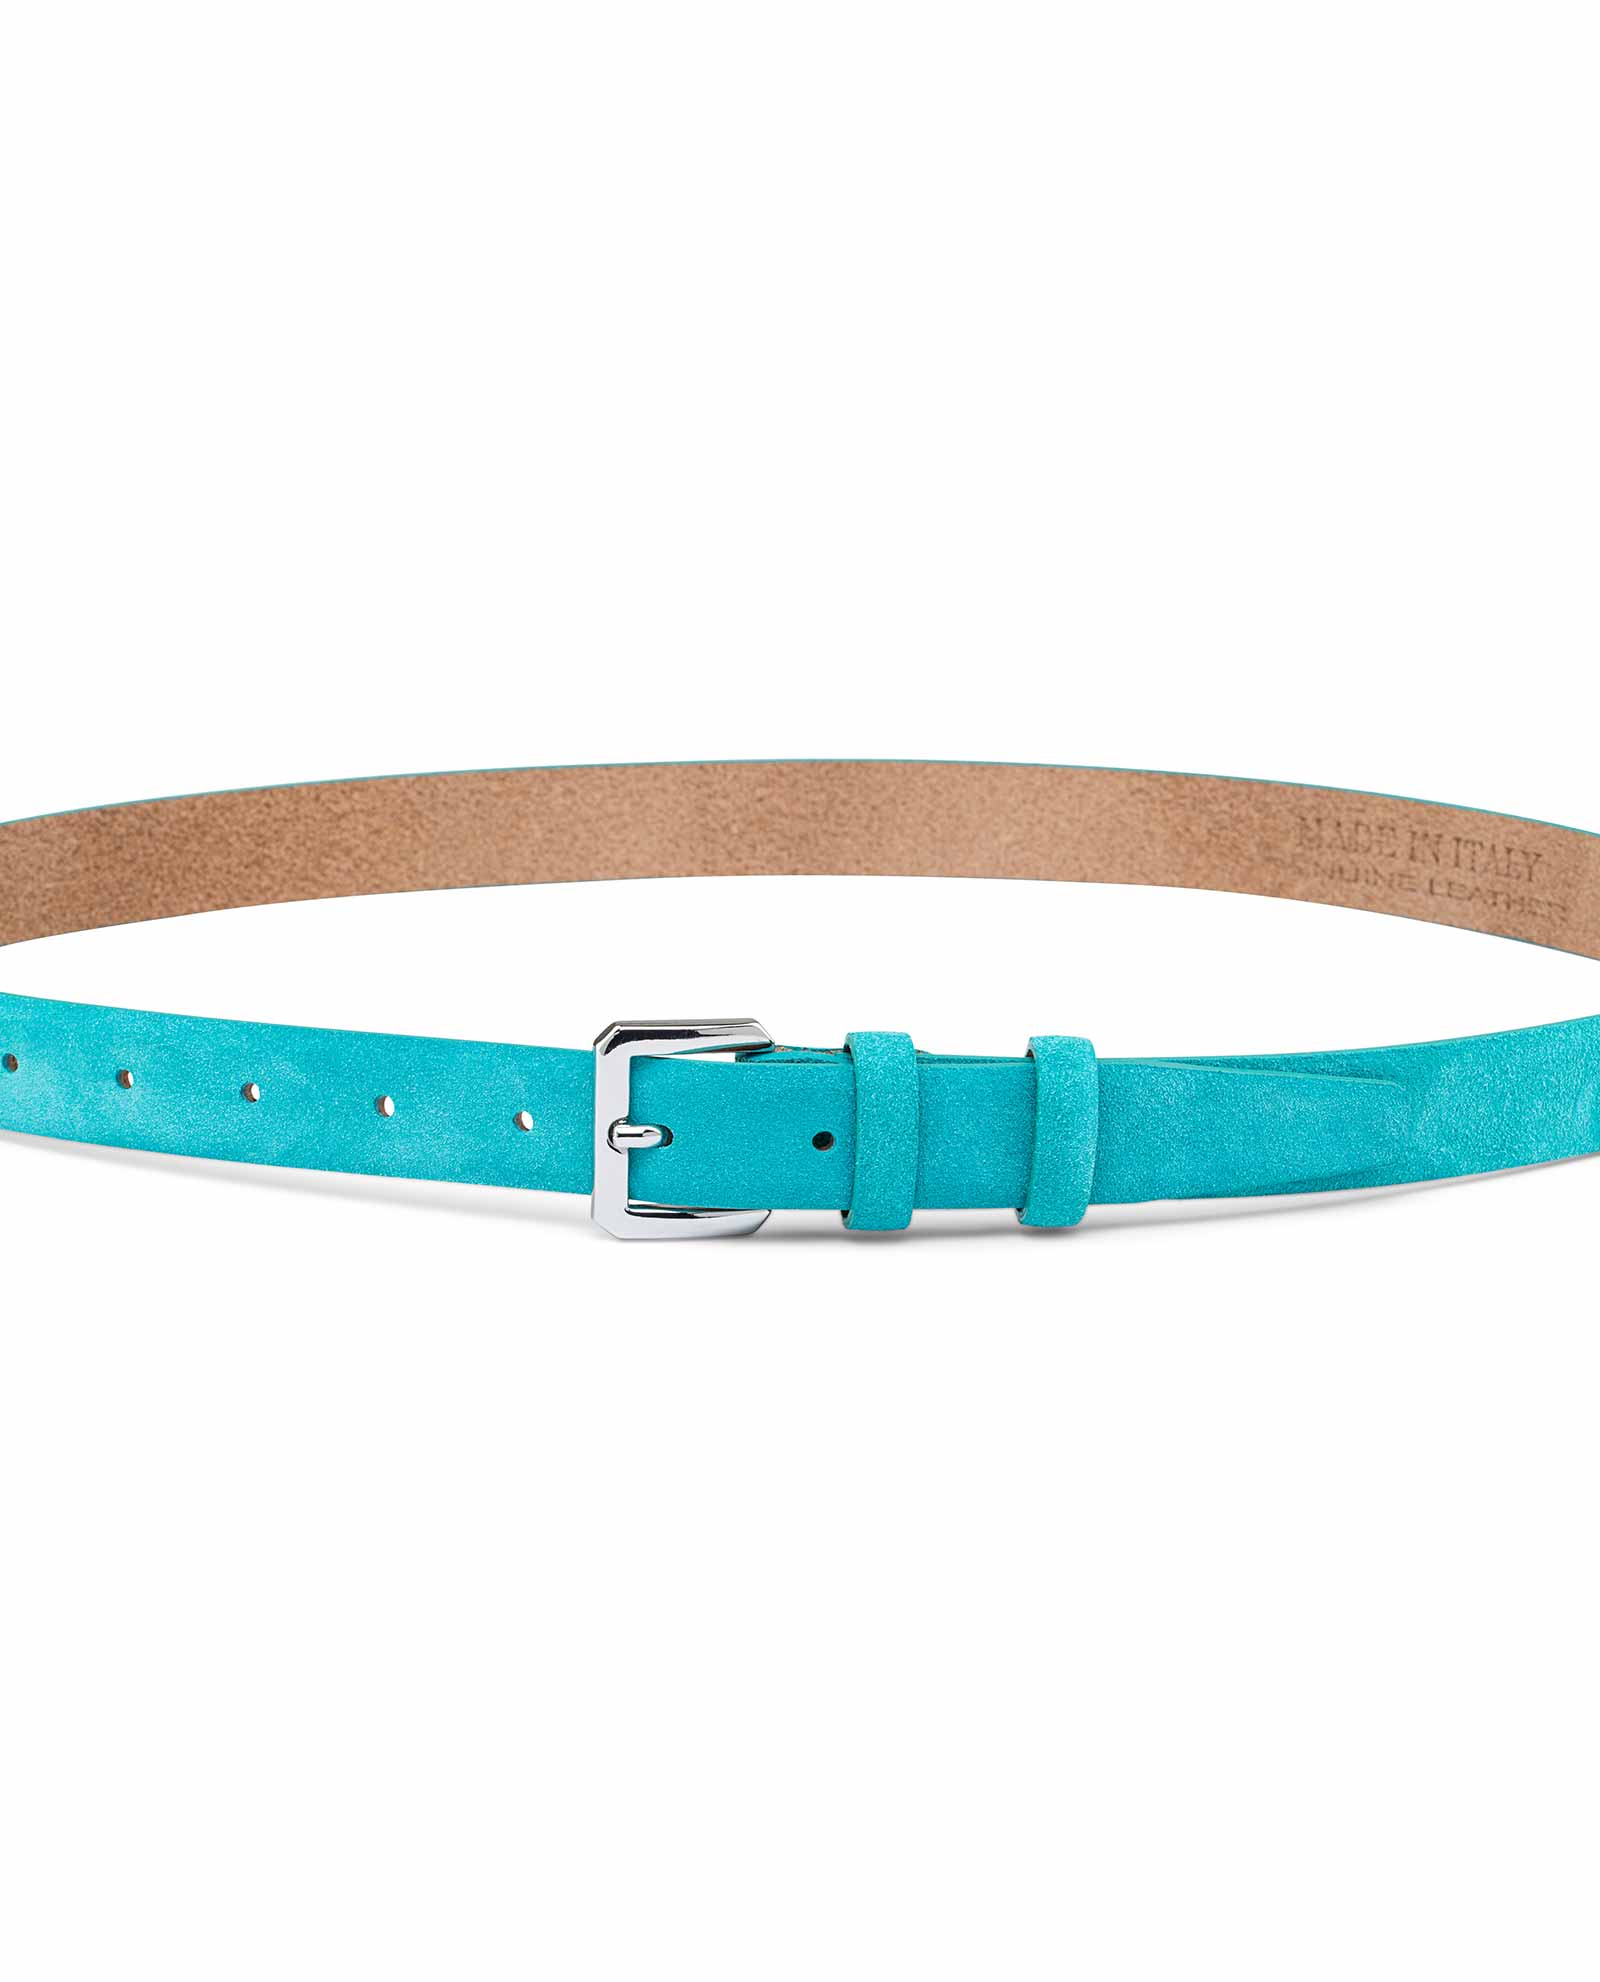 Buy Suede Turquoise Belt For Dress | Capo Pelle | Free shipping